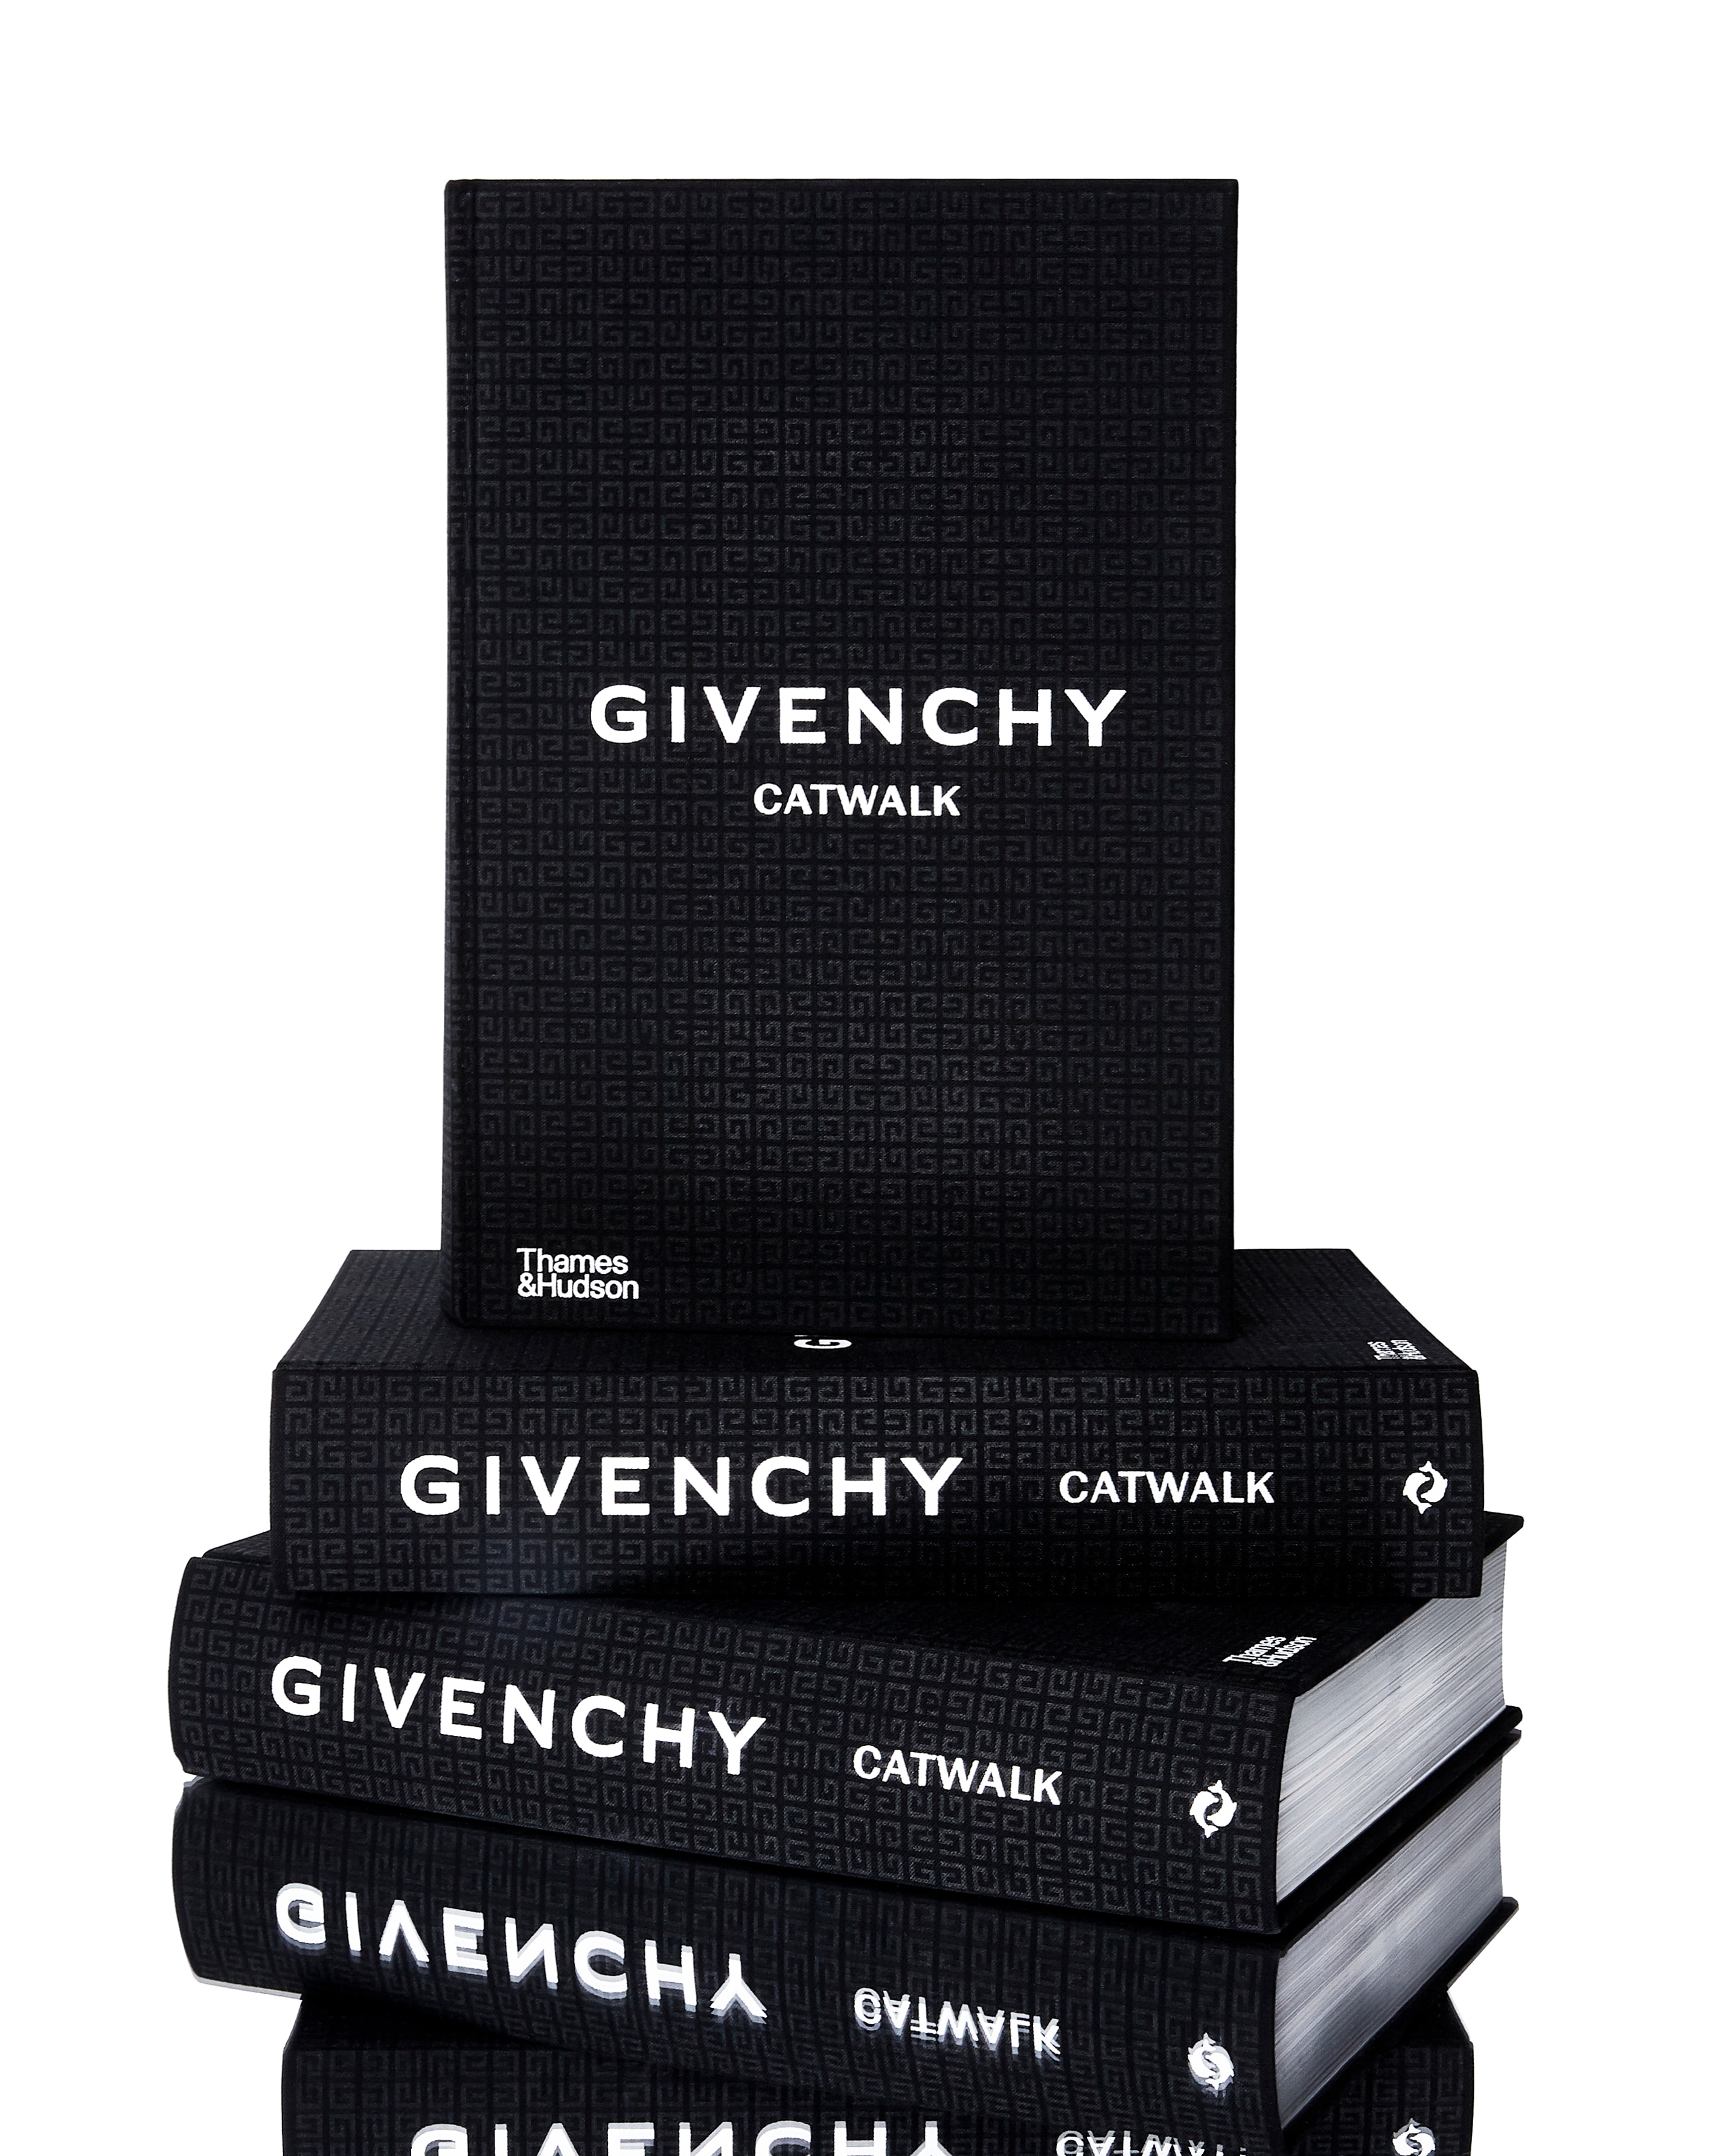 Givenchy Catwalk: The Complete Collections [Book]